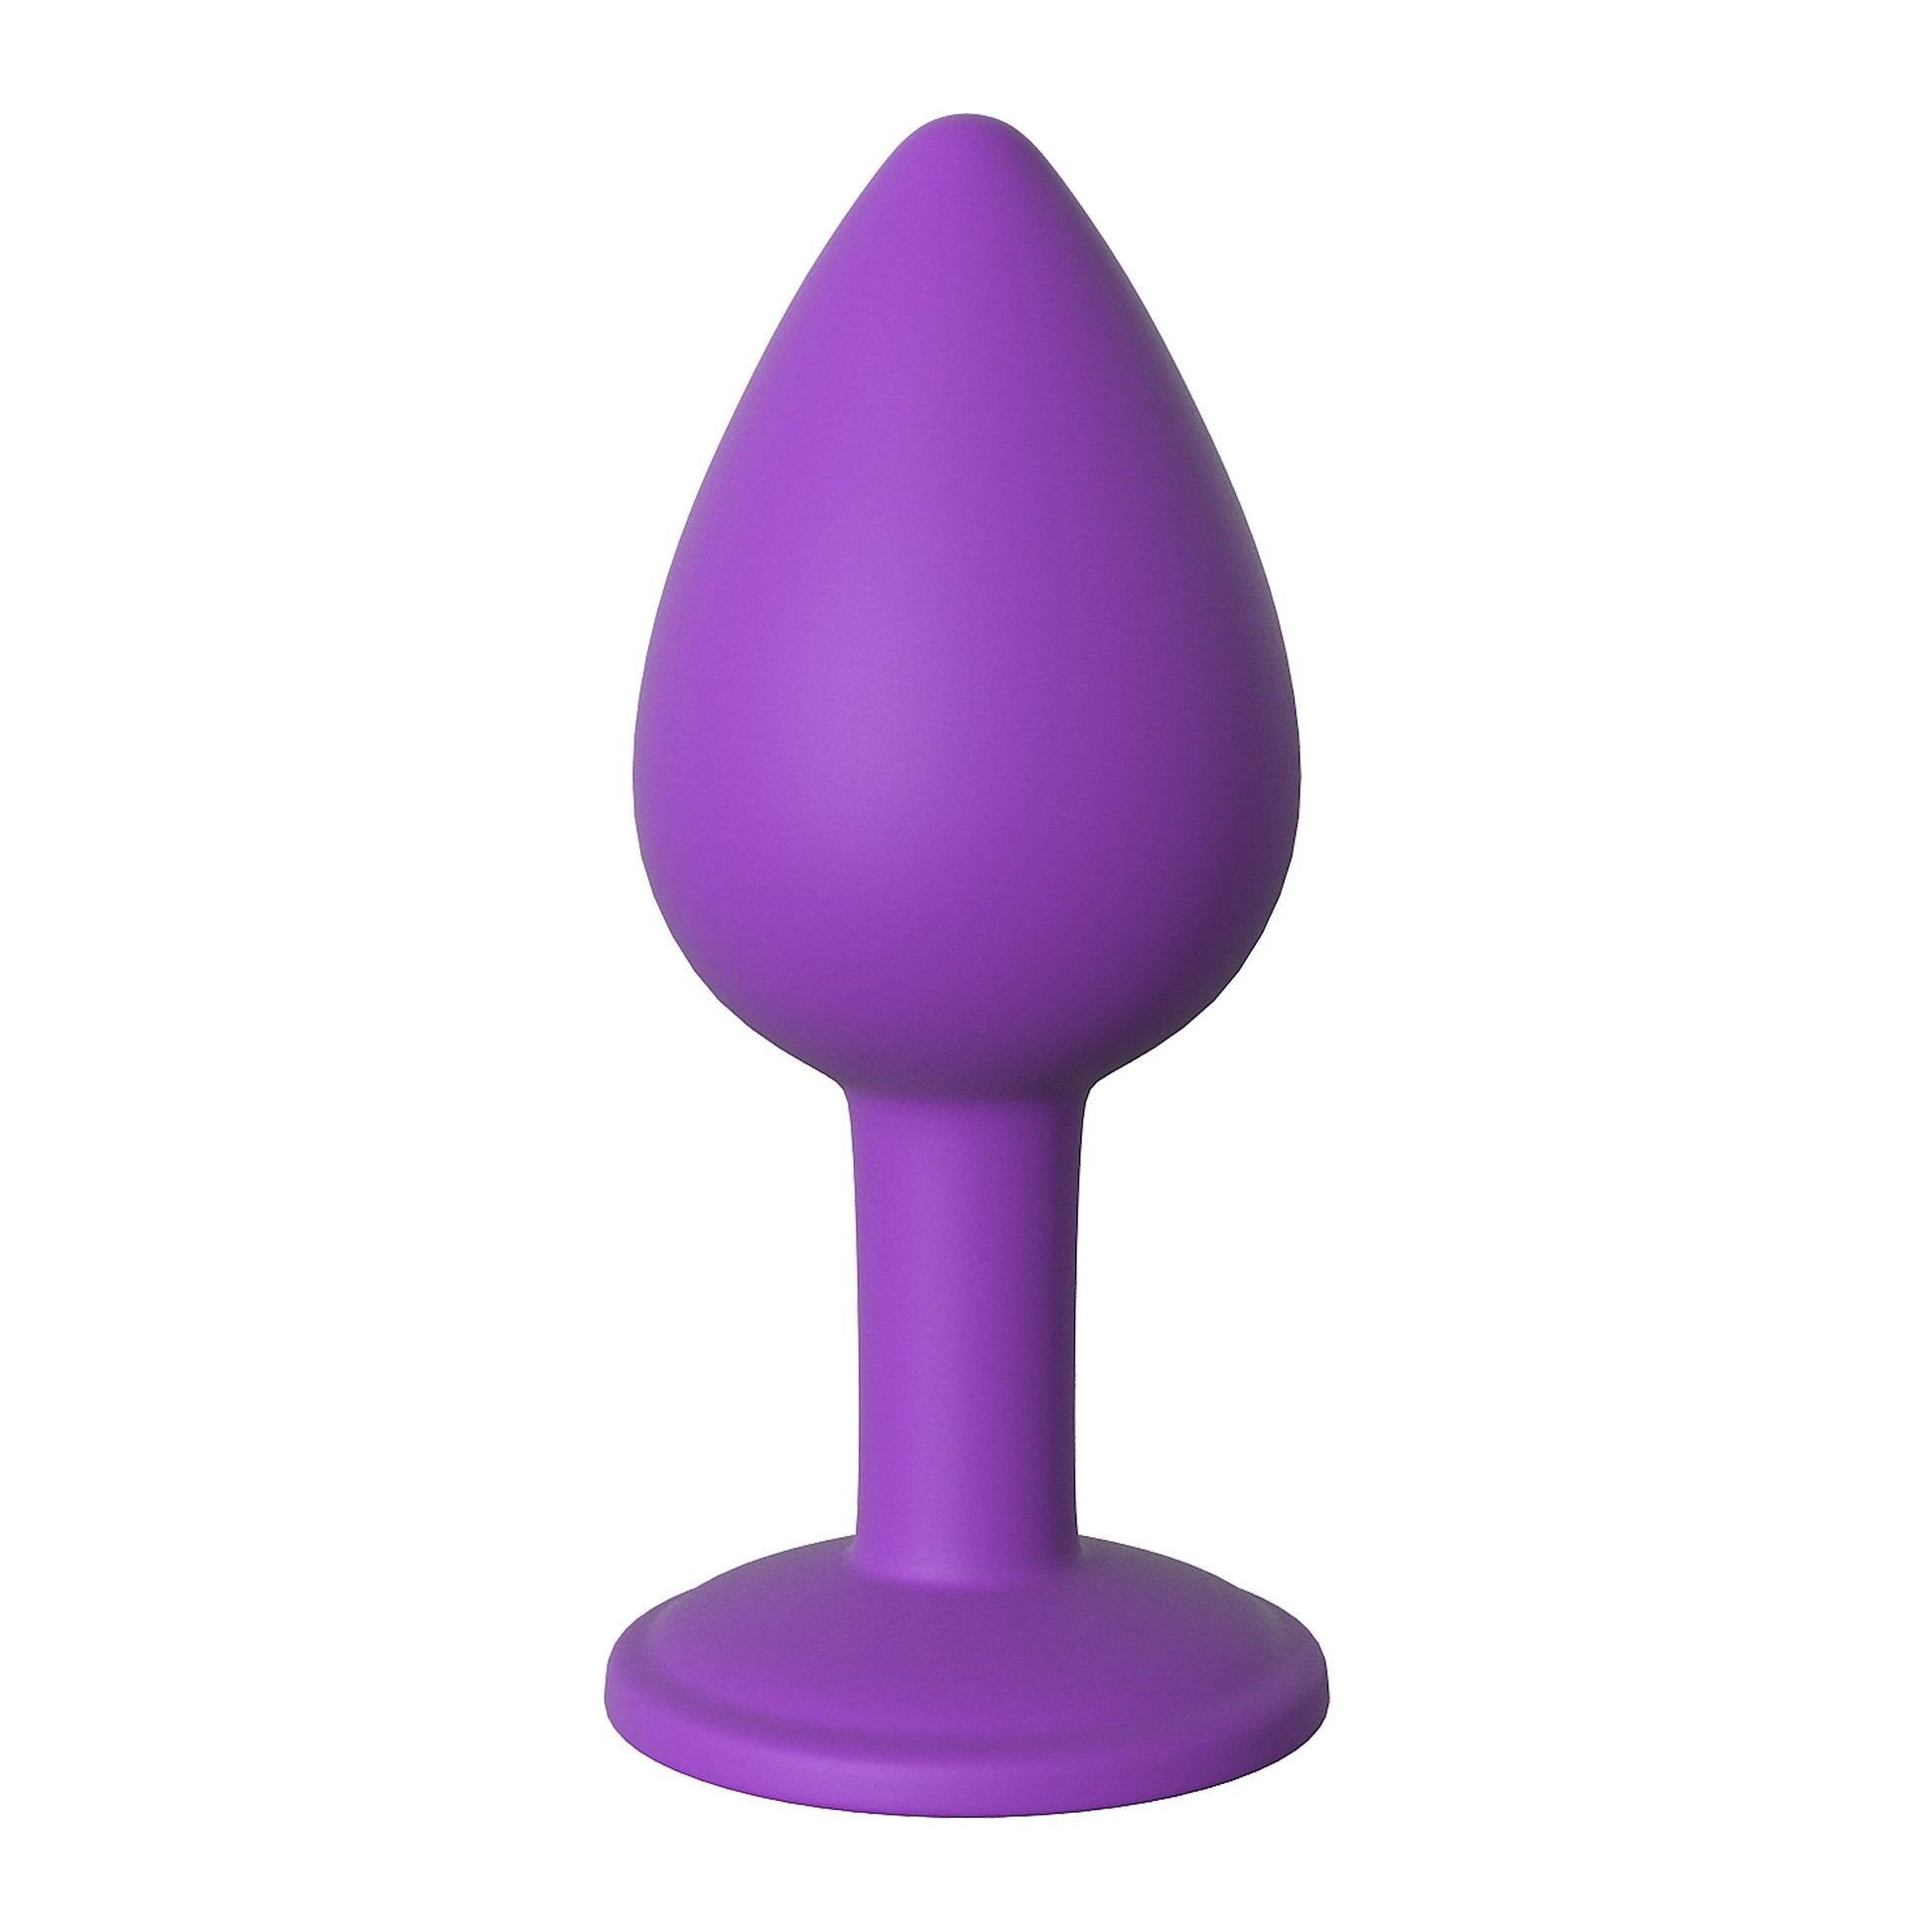 Fantasy For Her - Her Little Gem Small Plug - Thorn & Feather Sex Toy Canada